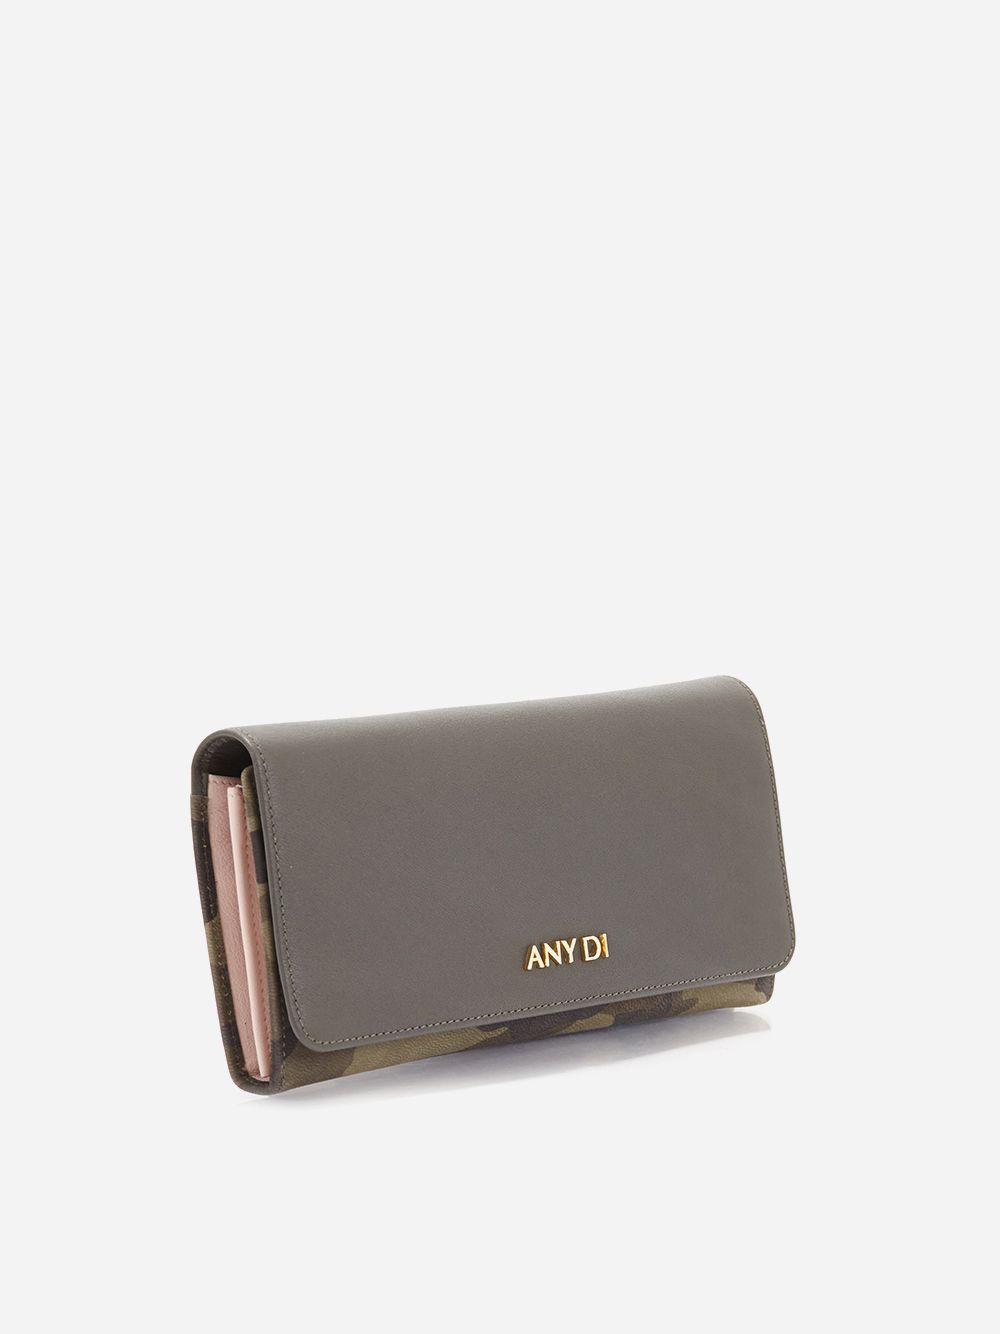 Khaki Clutch and Wallet | Any Di